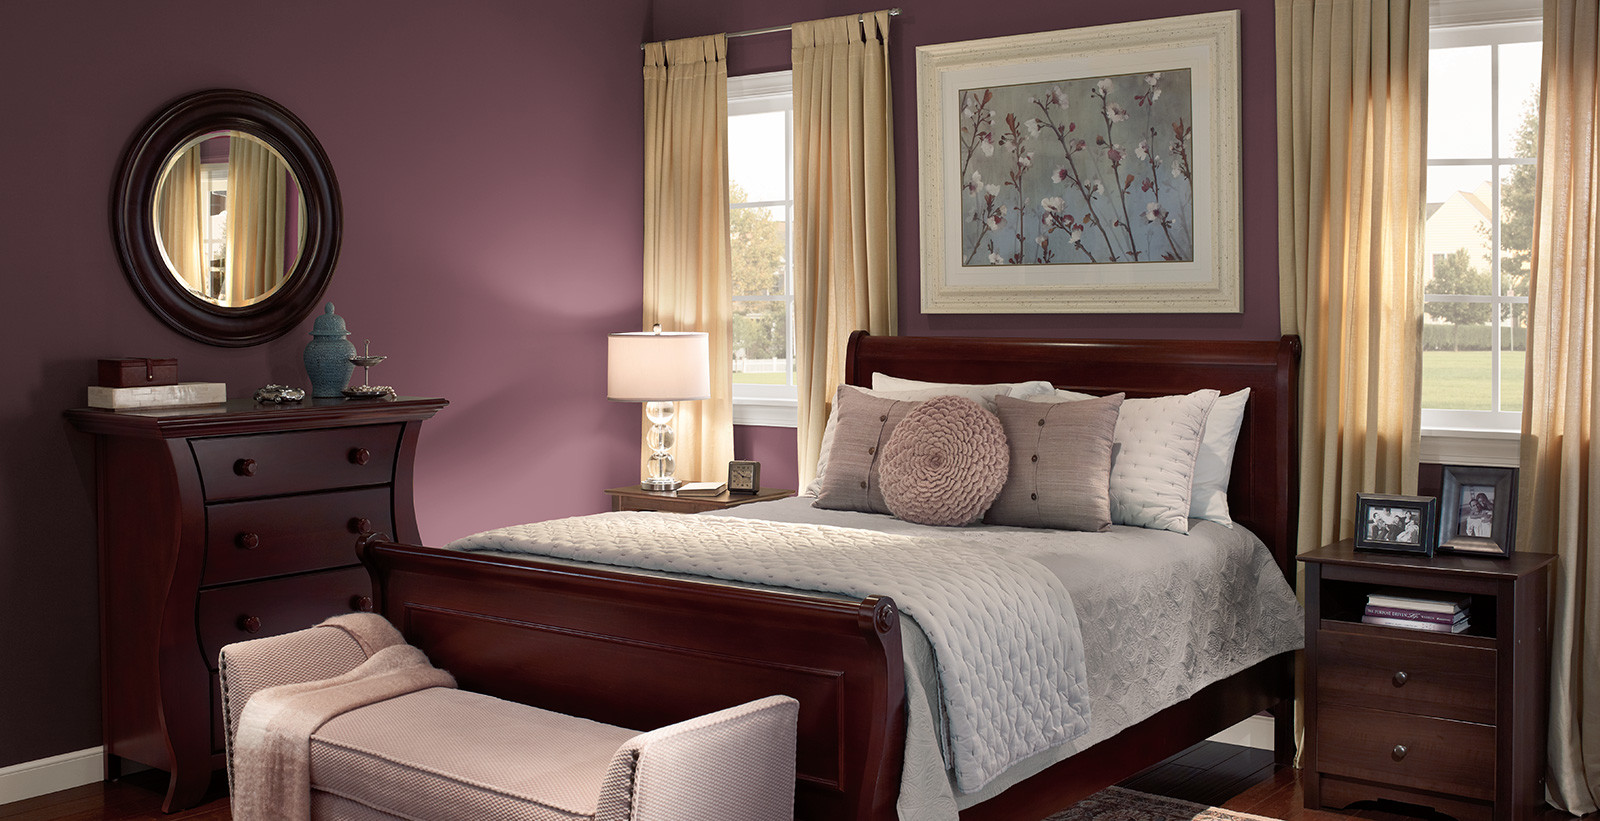 Behr Bedroom Colors
 Classic and Traditional Bedroom Ideas Paint Colors